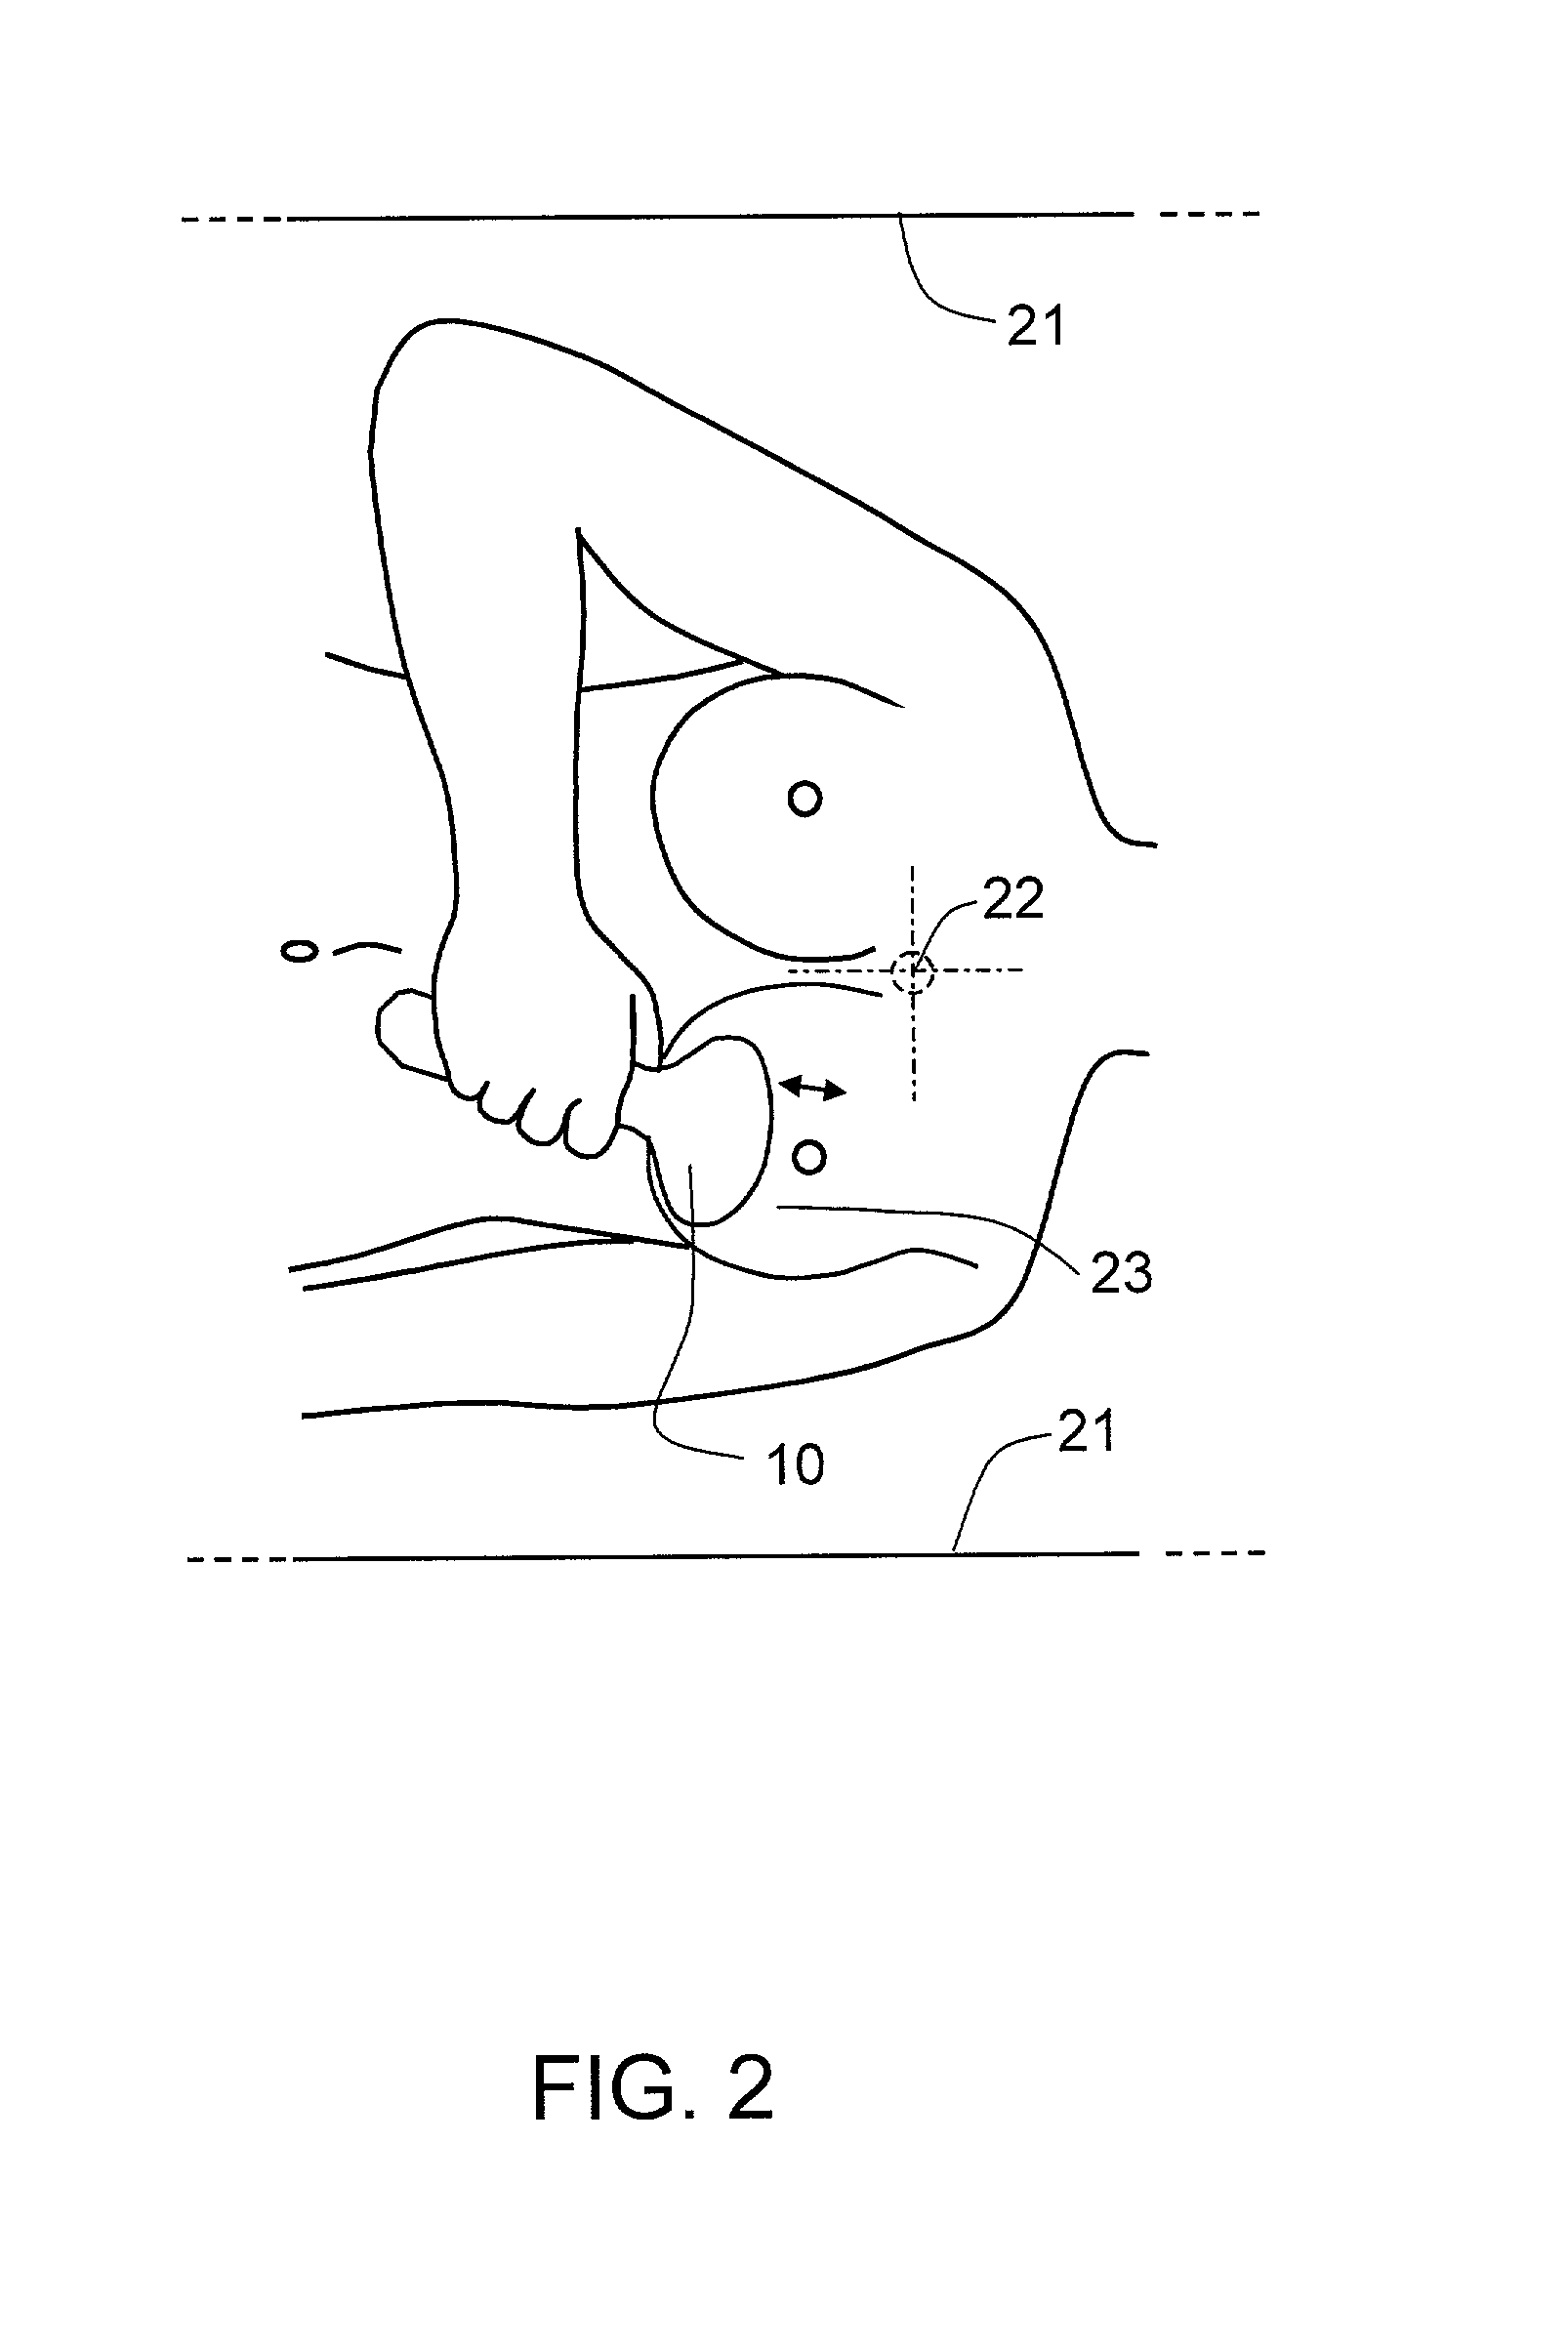 Self-palpation device for examination of breast with 3-D positioning system